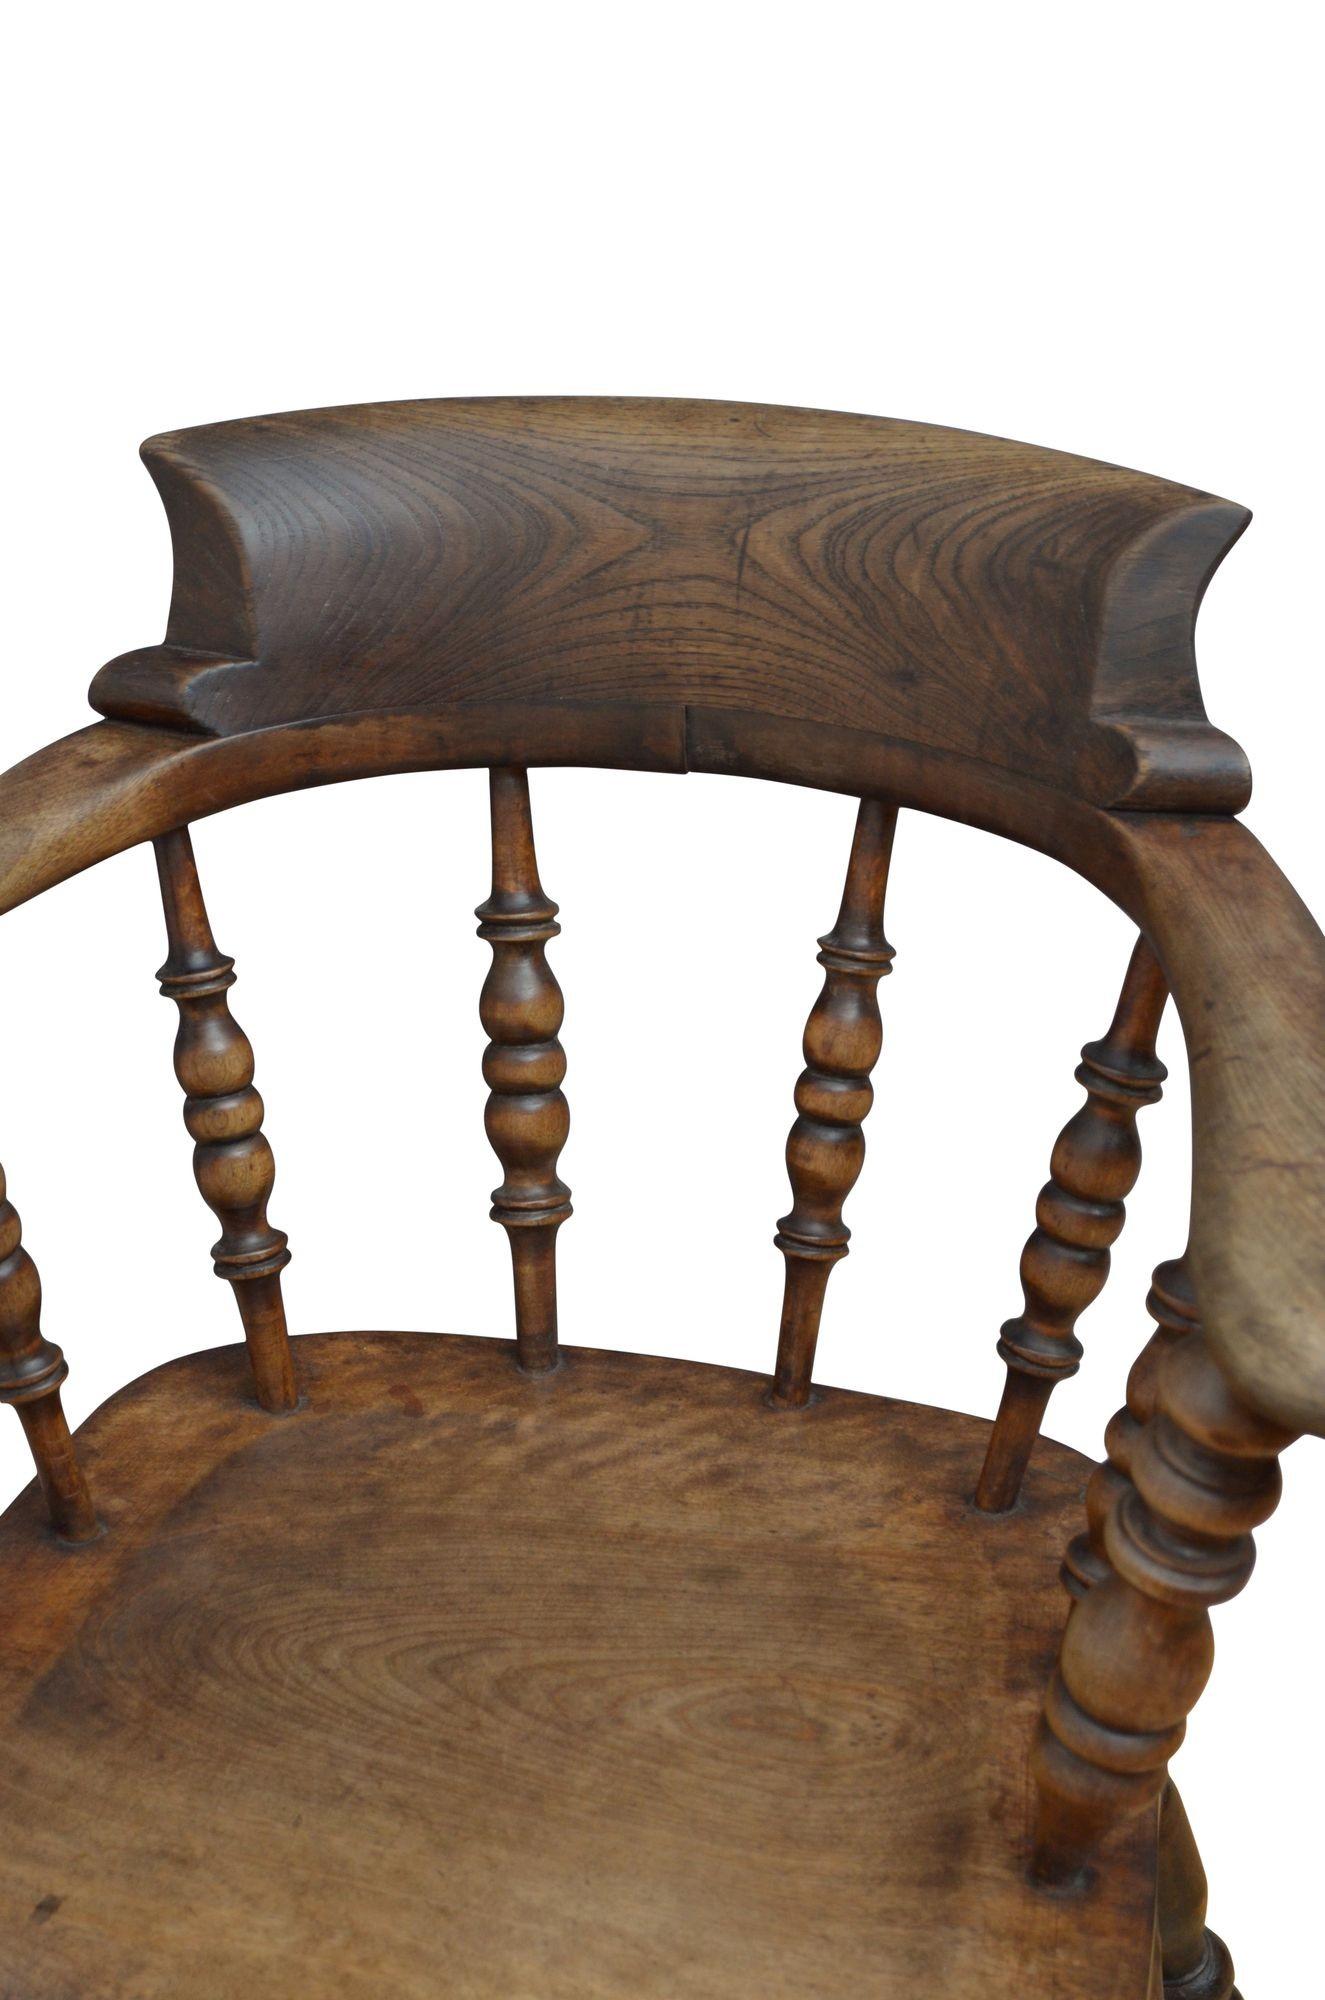 0239 Late Victorian ash and elm smokers bow armchair with shaped top rail supported on turned uprights and generous seat, all standing on substantial turned legs united by double stretchers. This chair is in original, ready to place at home